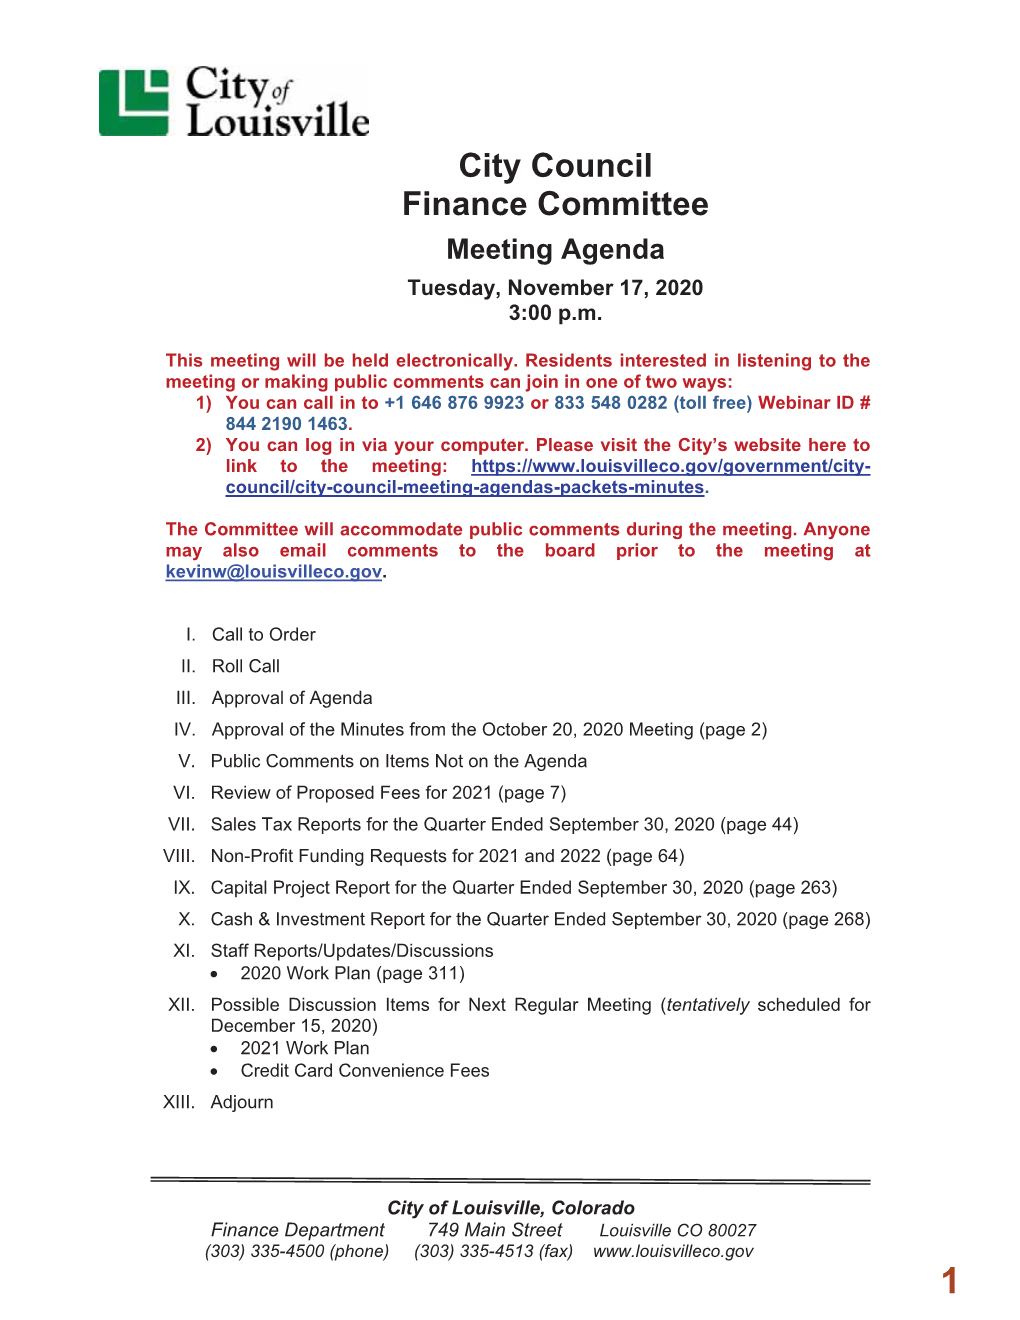 City Council Finance Committee